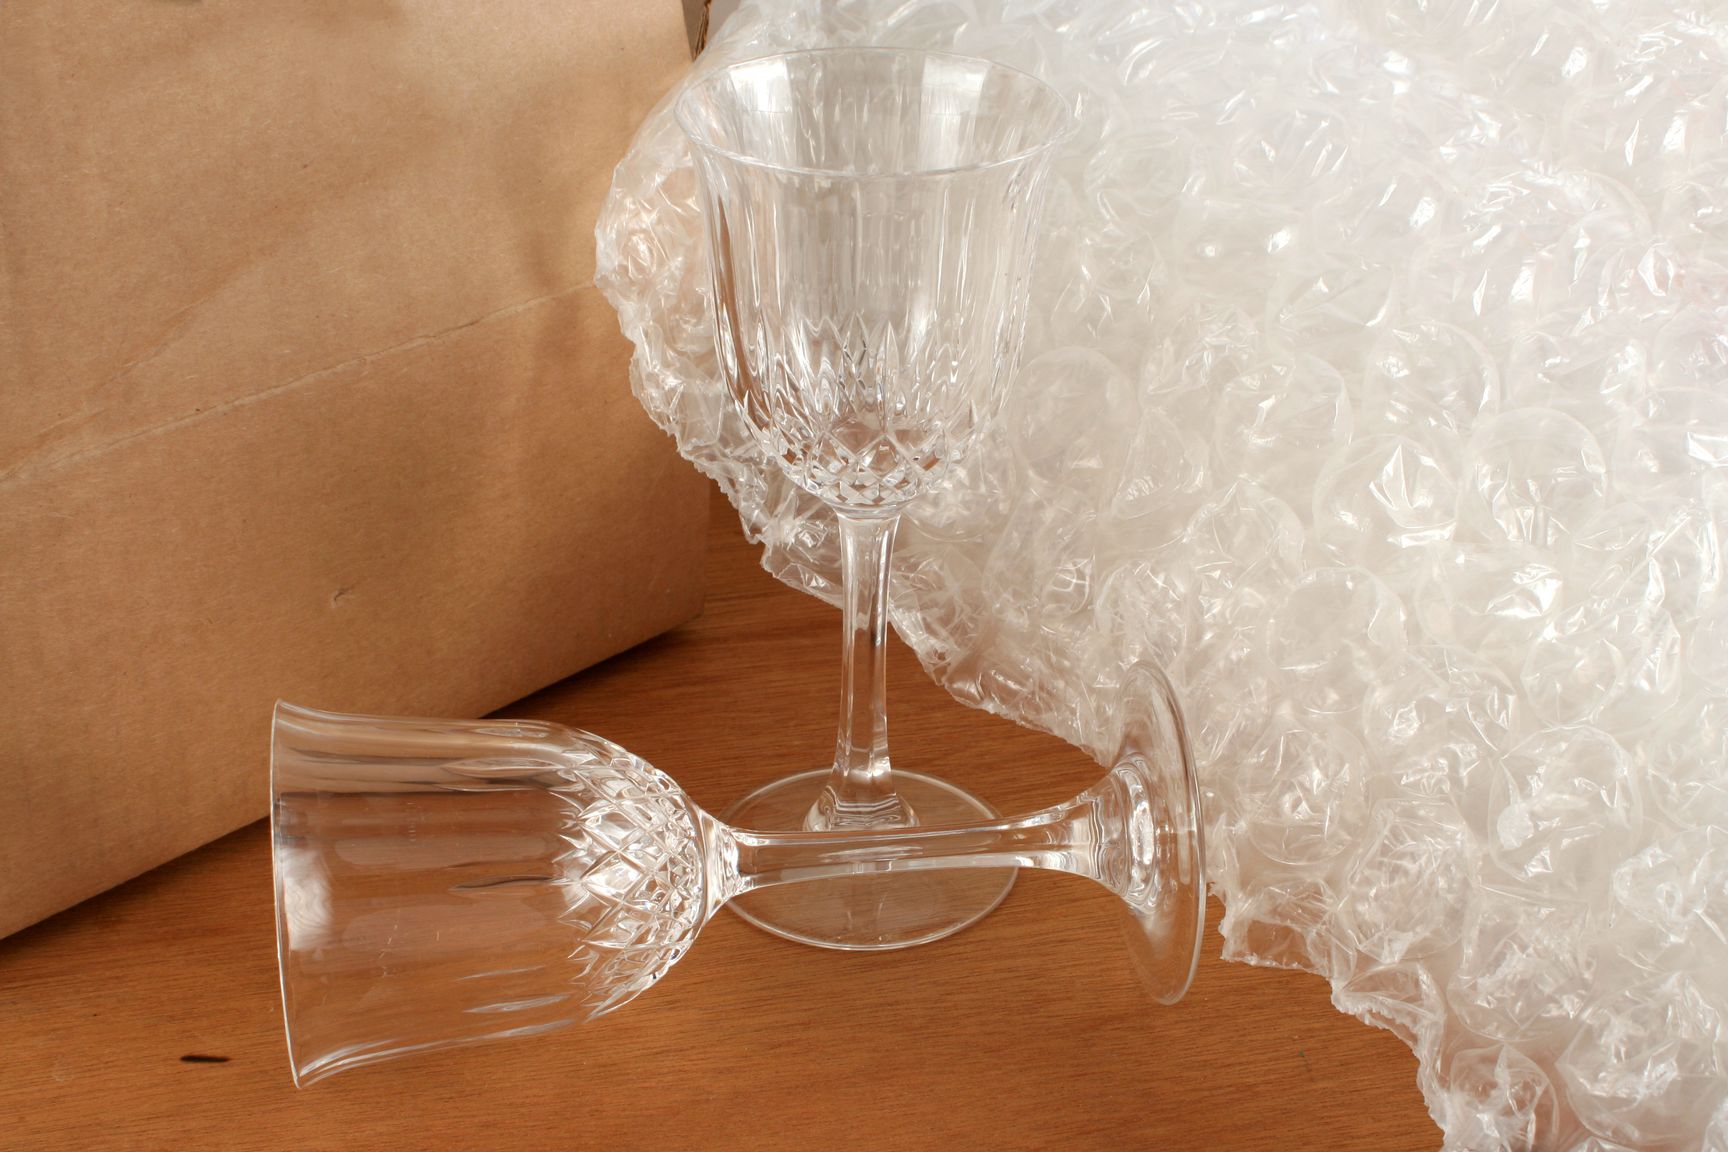 Crystal glasses surrounded by a bubble wrap